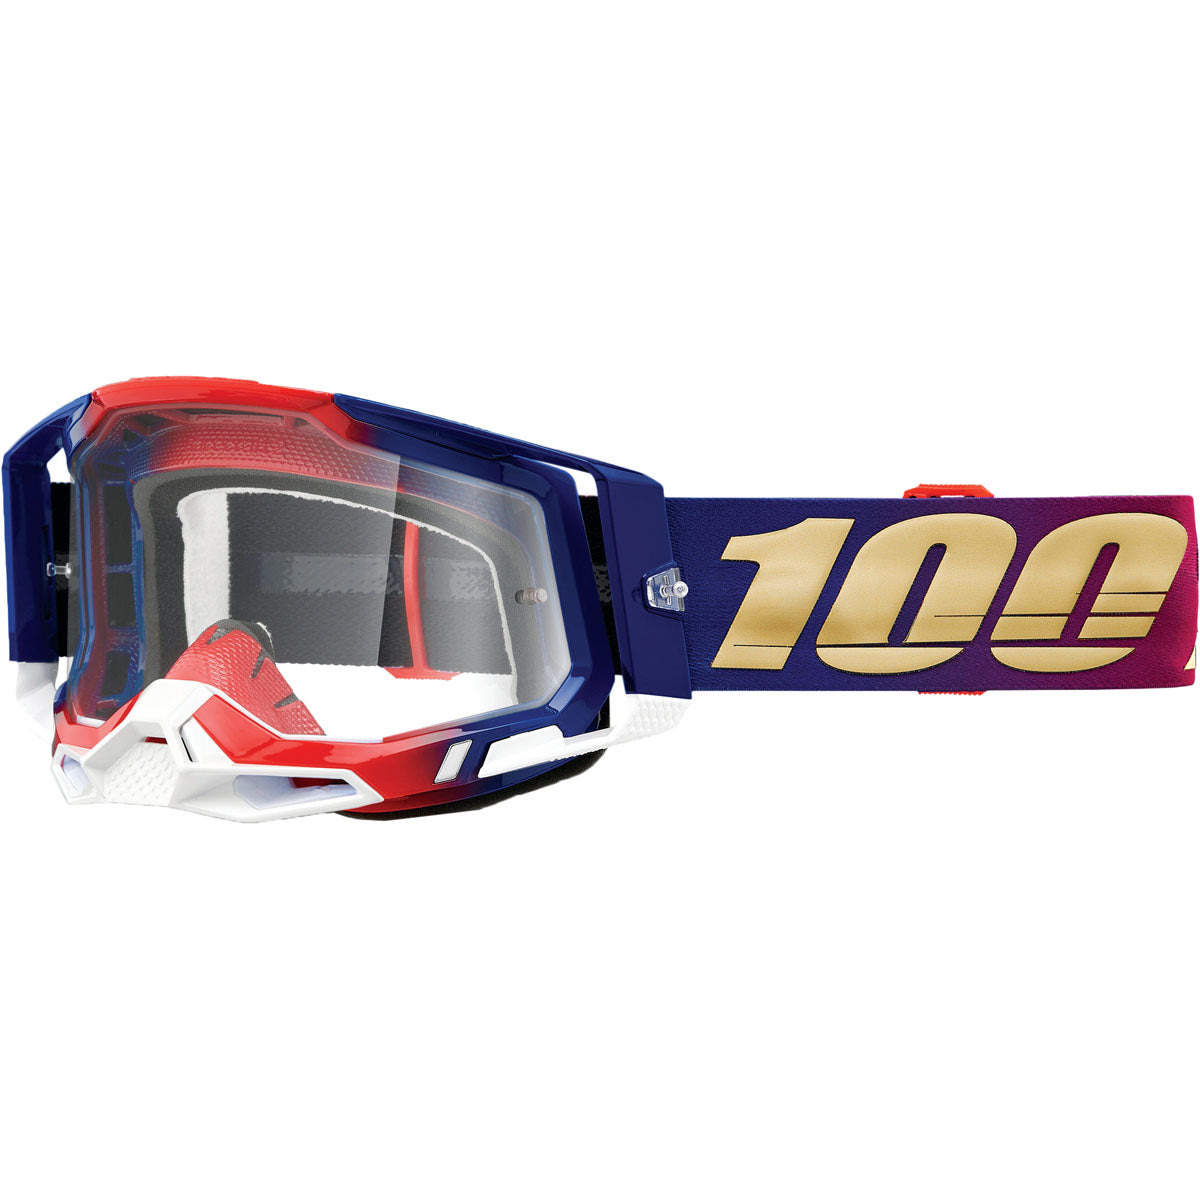 100% Racecraft 2 Goggles United / Clear Lens